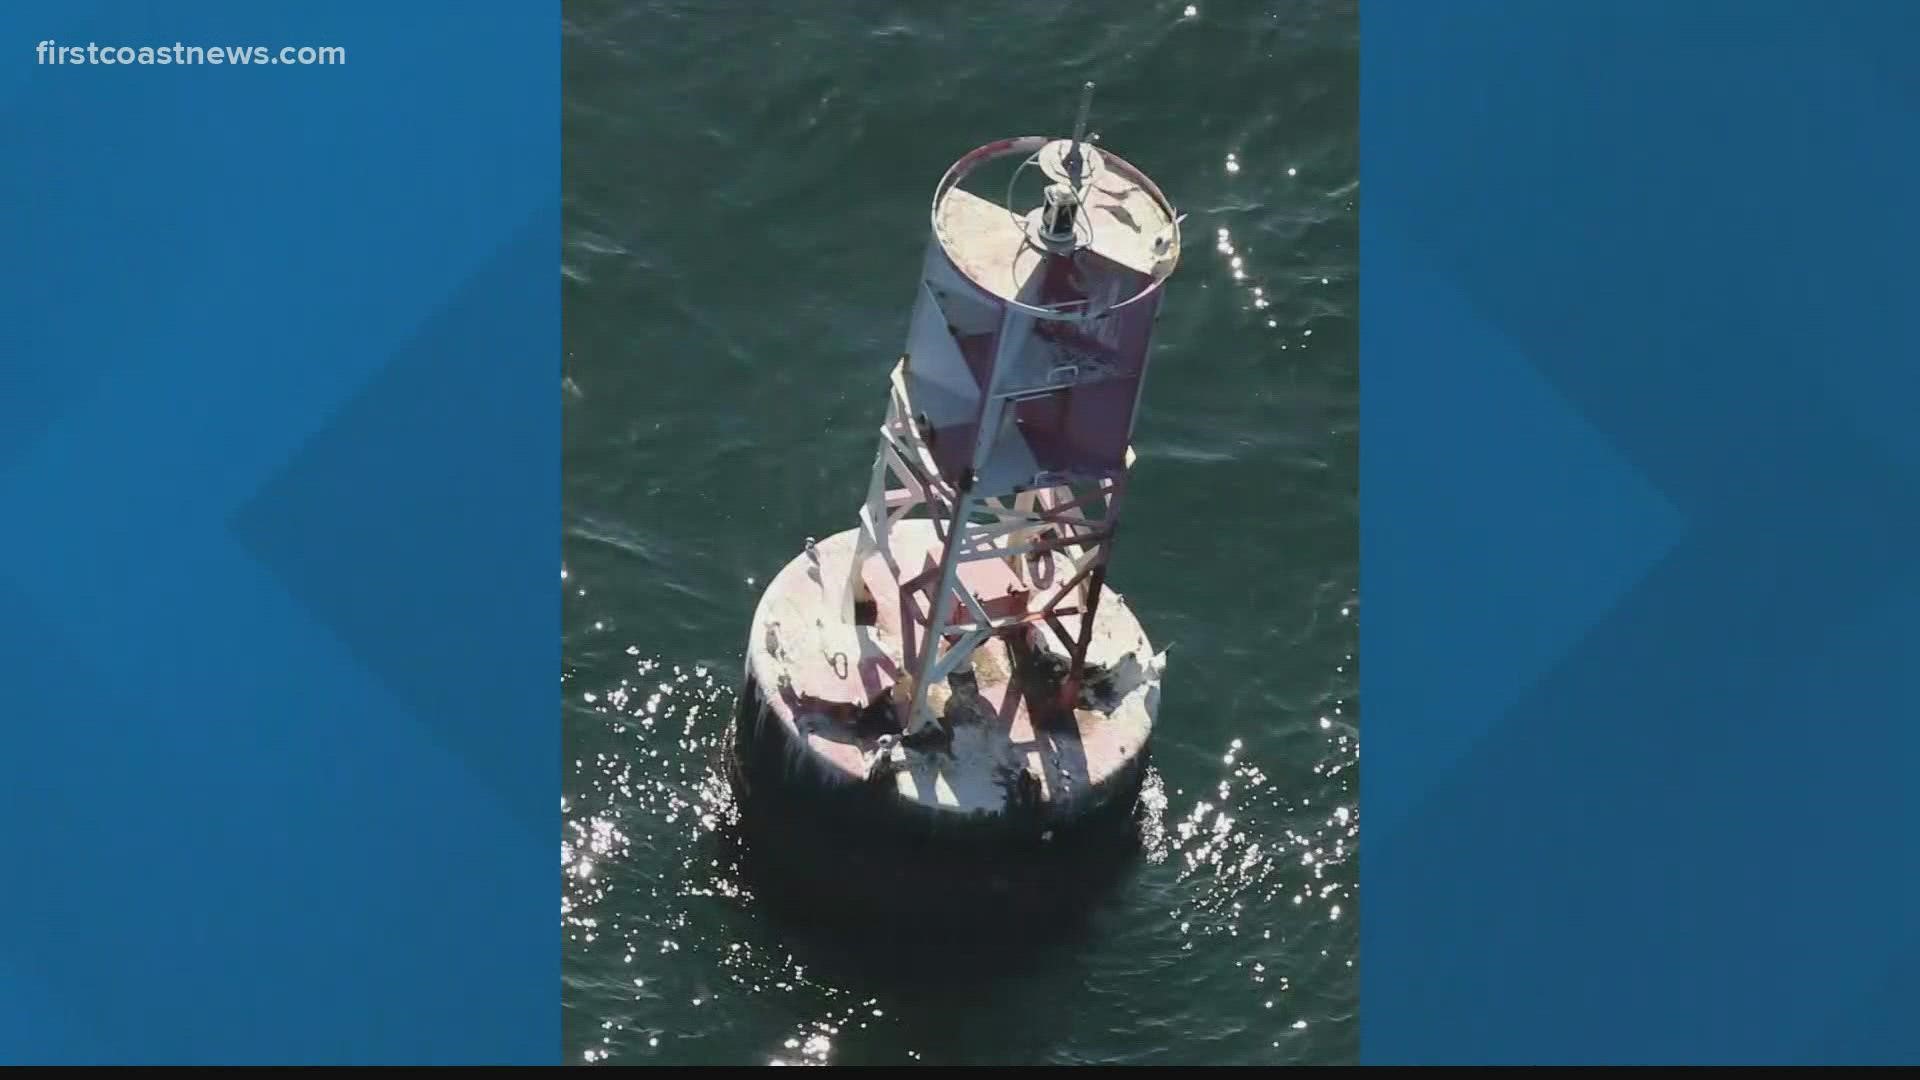 The wayward buoy could be dangerous for boaters.